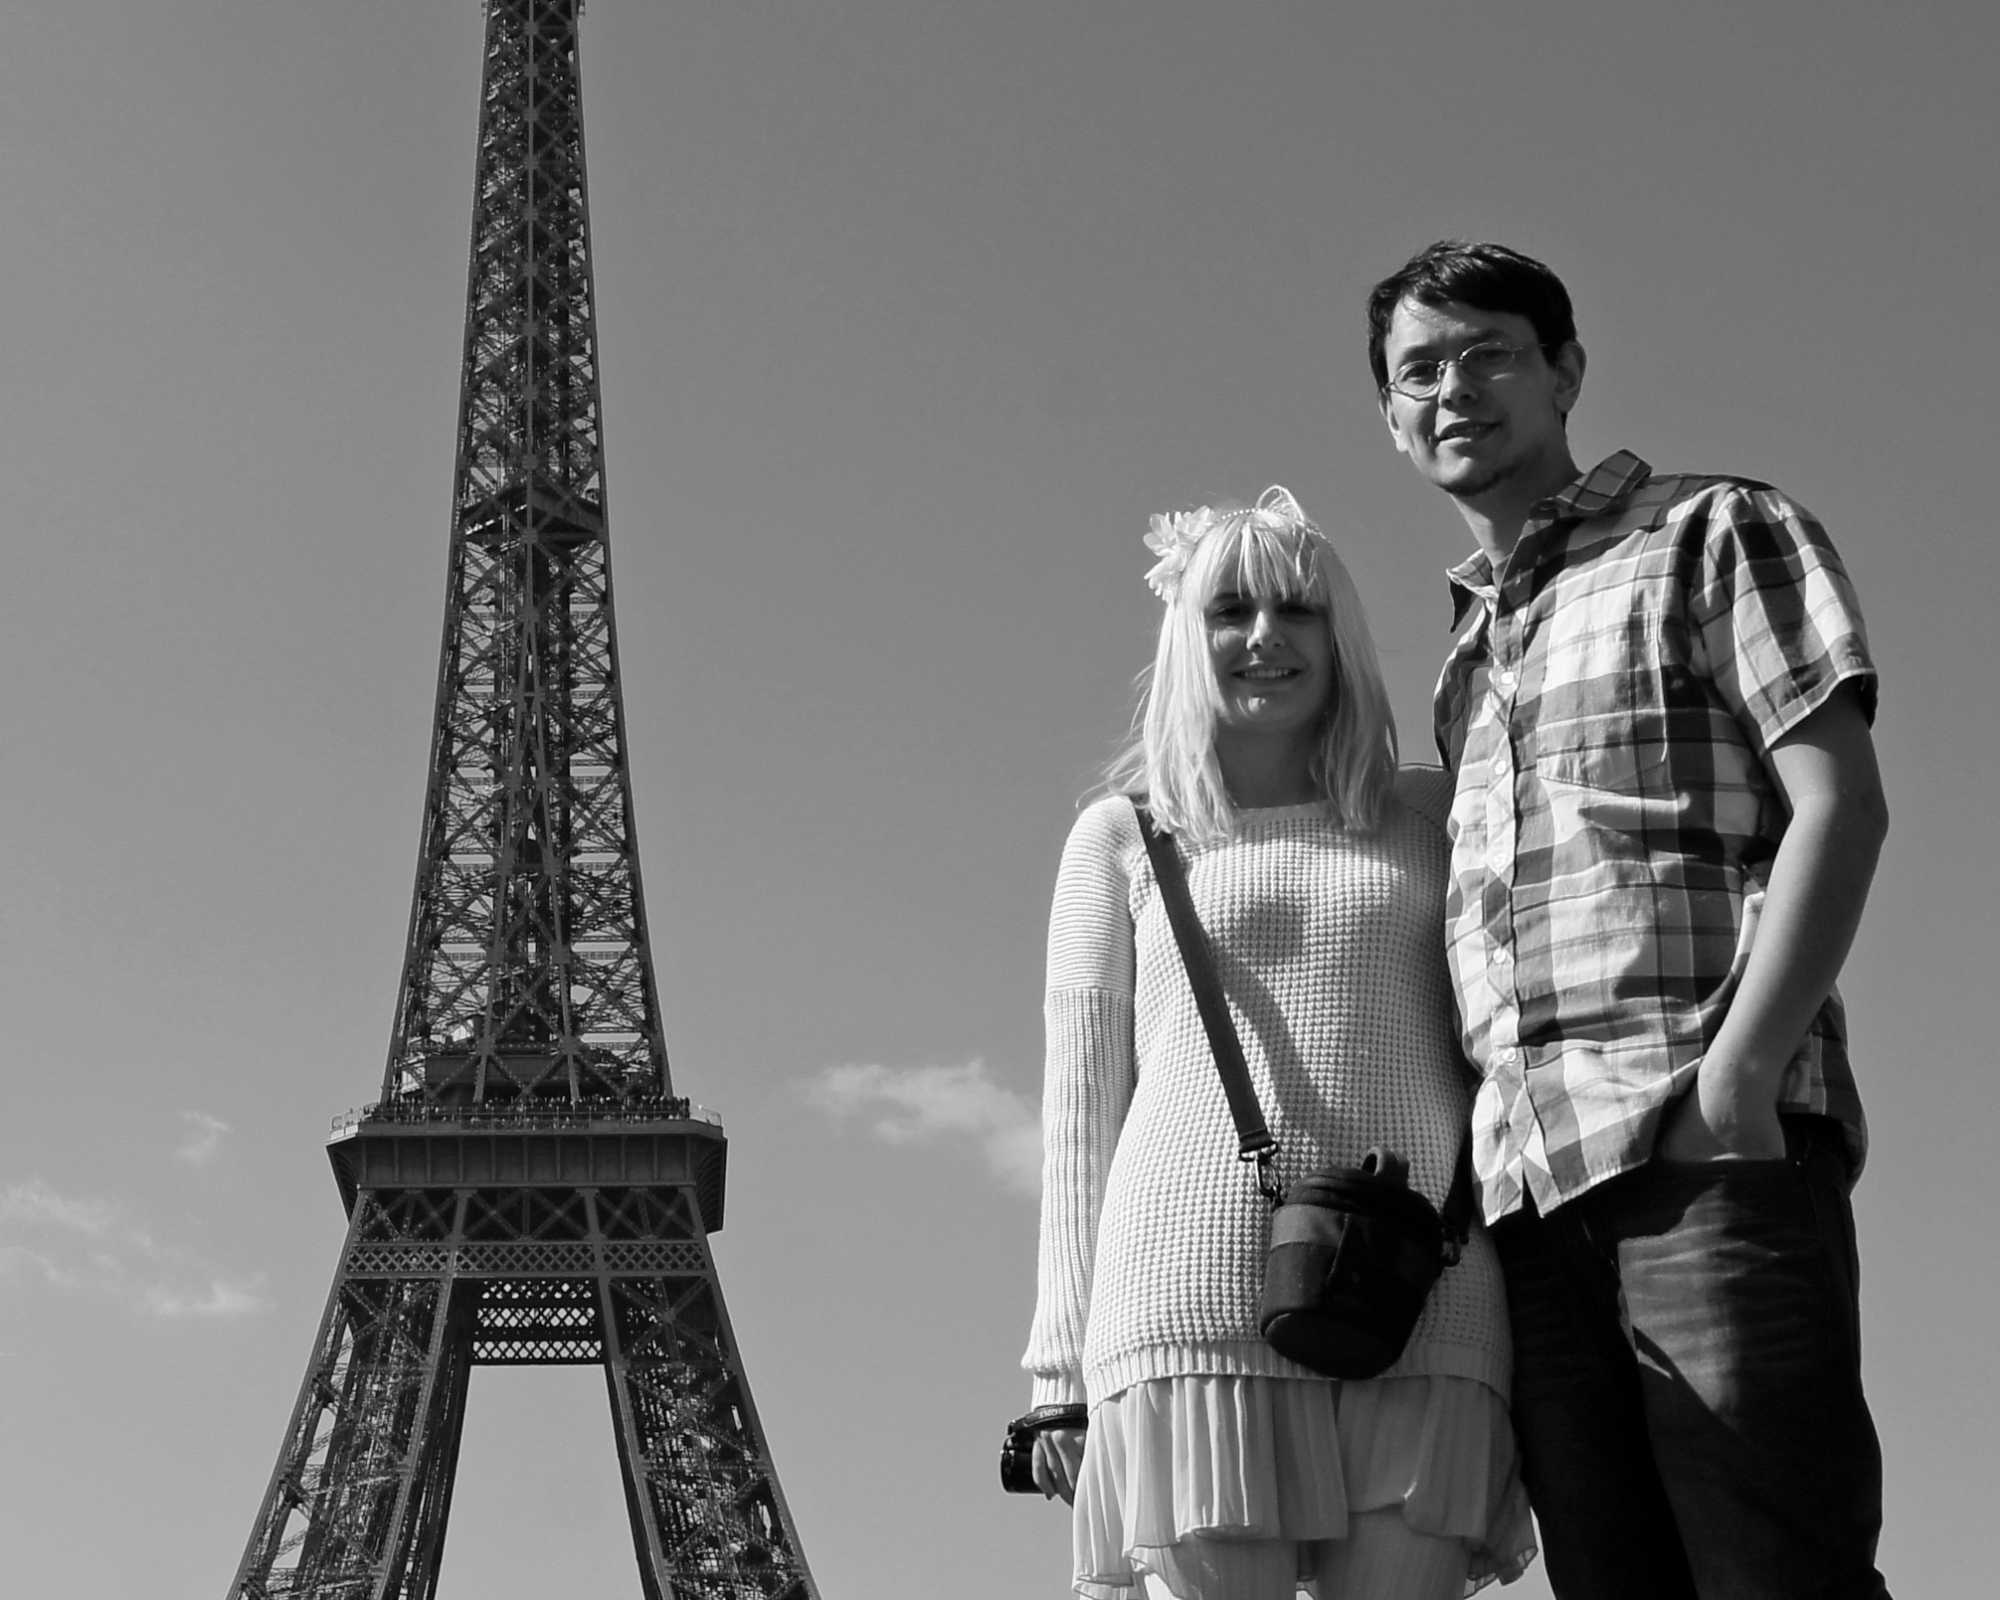 Josh and Lisa Infront of the Eiffel Tower